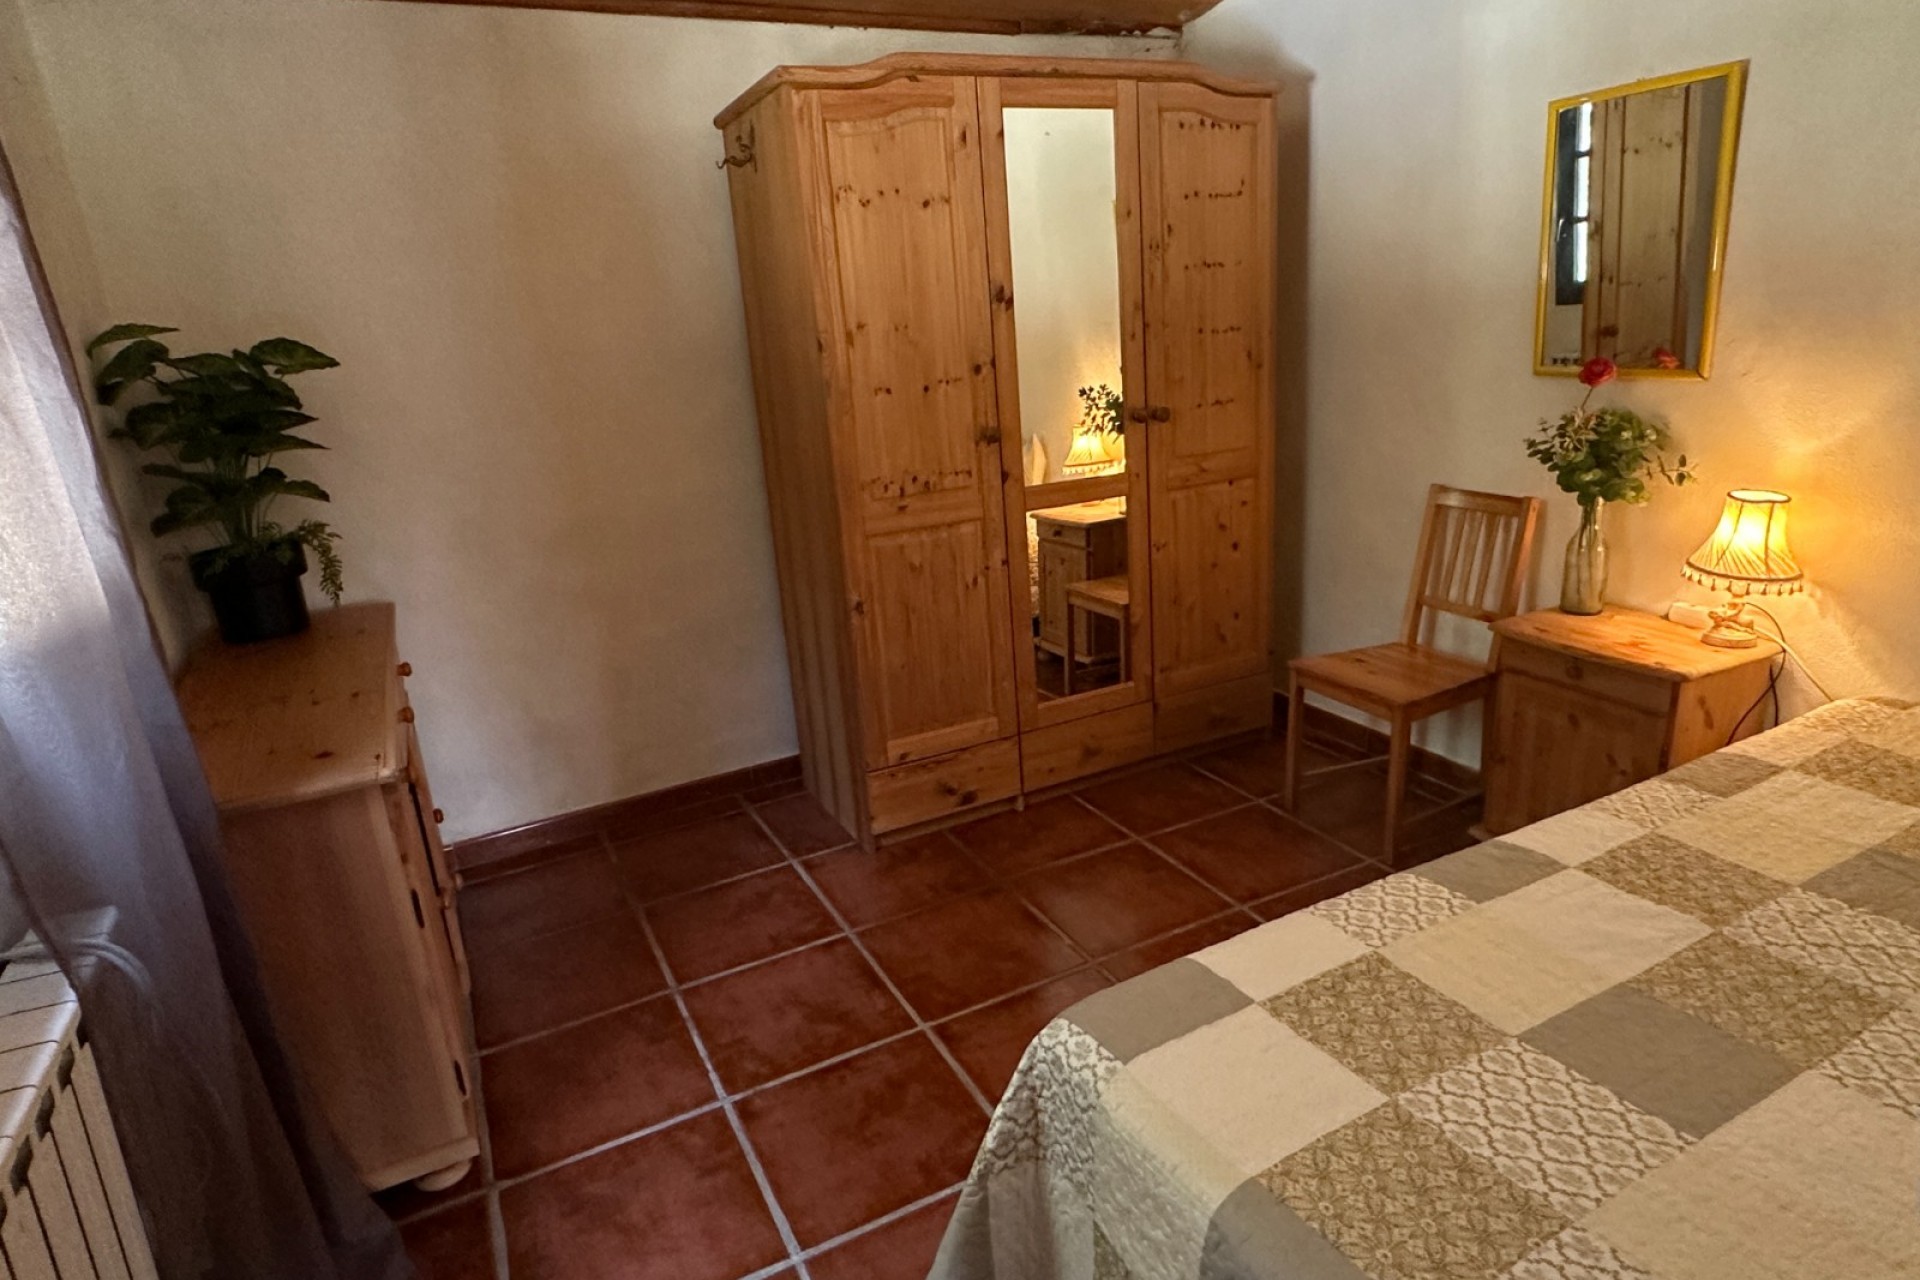 Reventa - Country House -
Bocairent - Inland